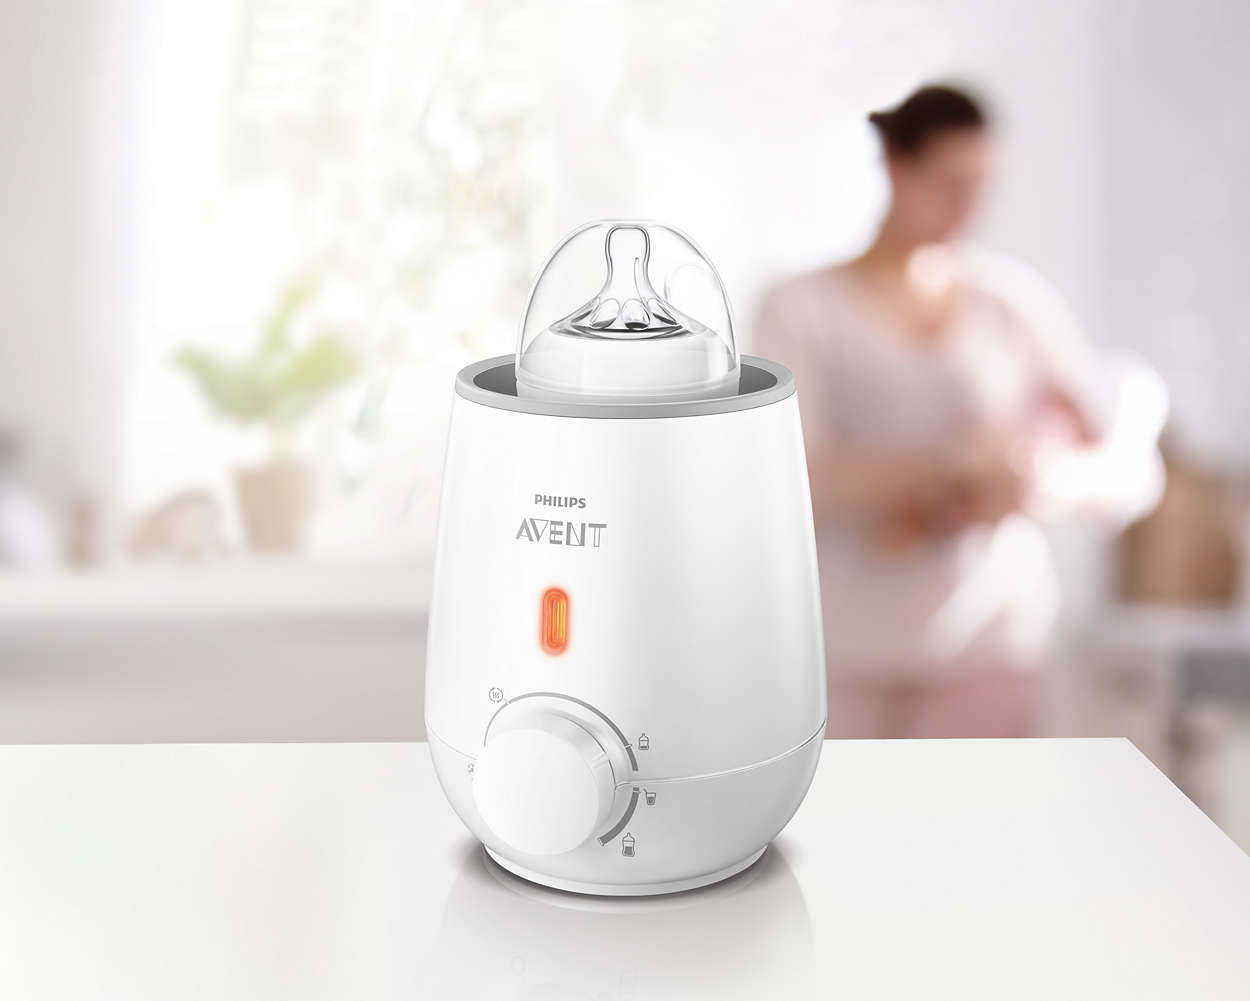 *Philips Avent Fast Bottle Electric Warmer